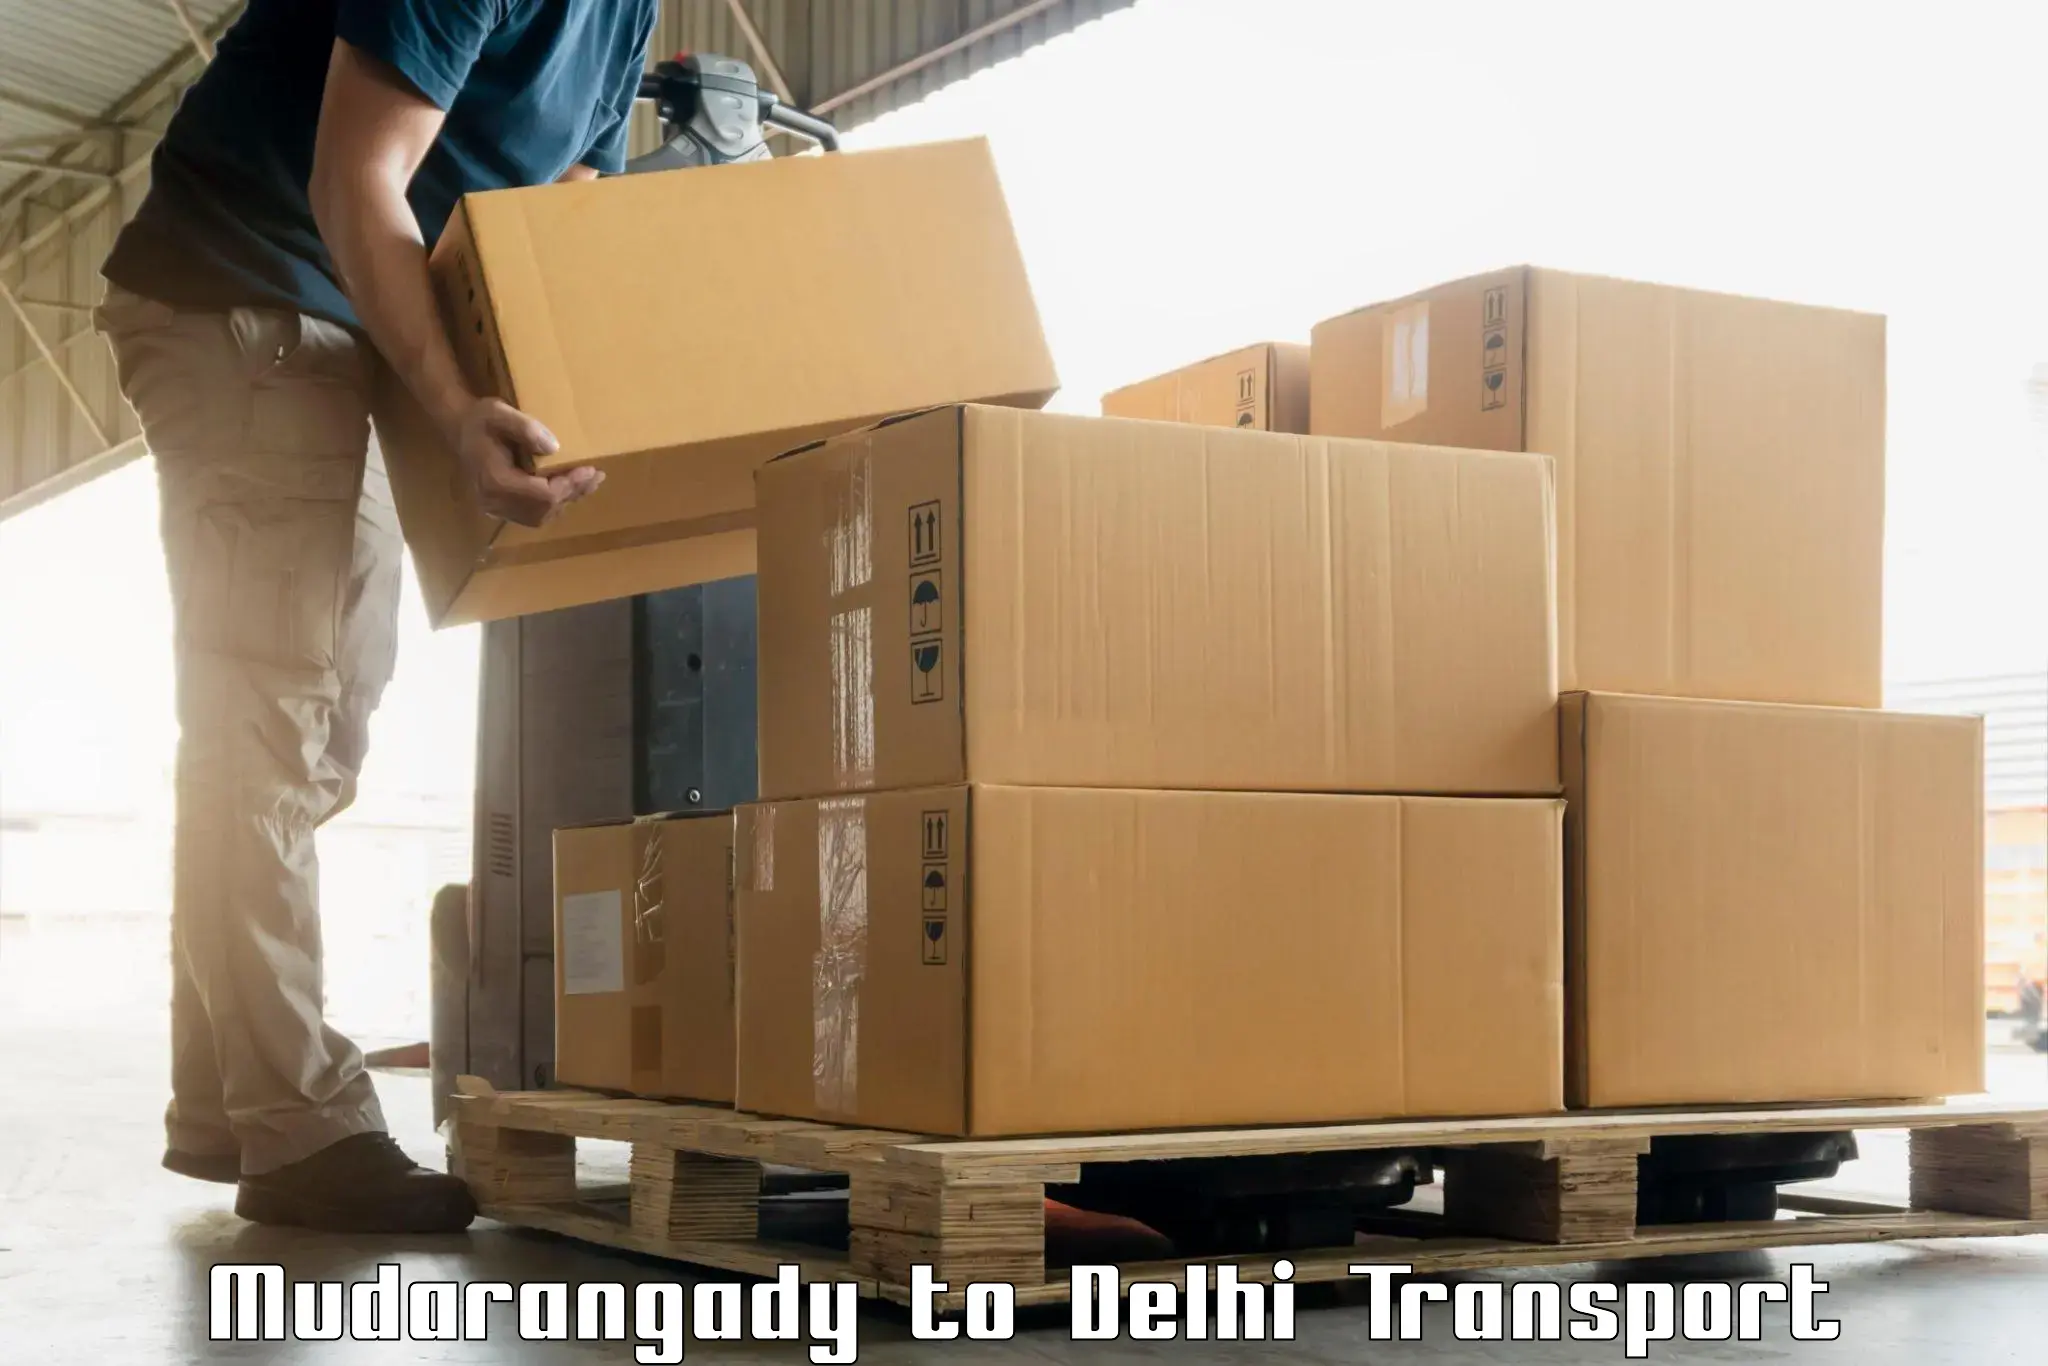 Truck transport companies in India Mudarangady to East Delhi